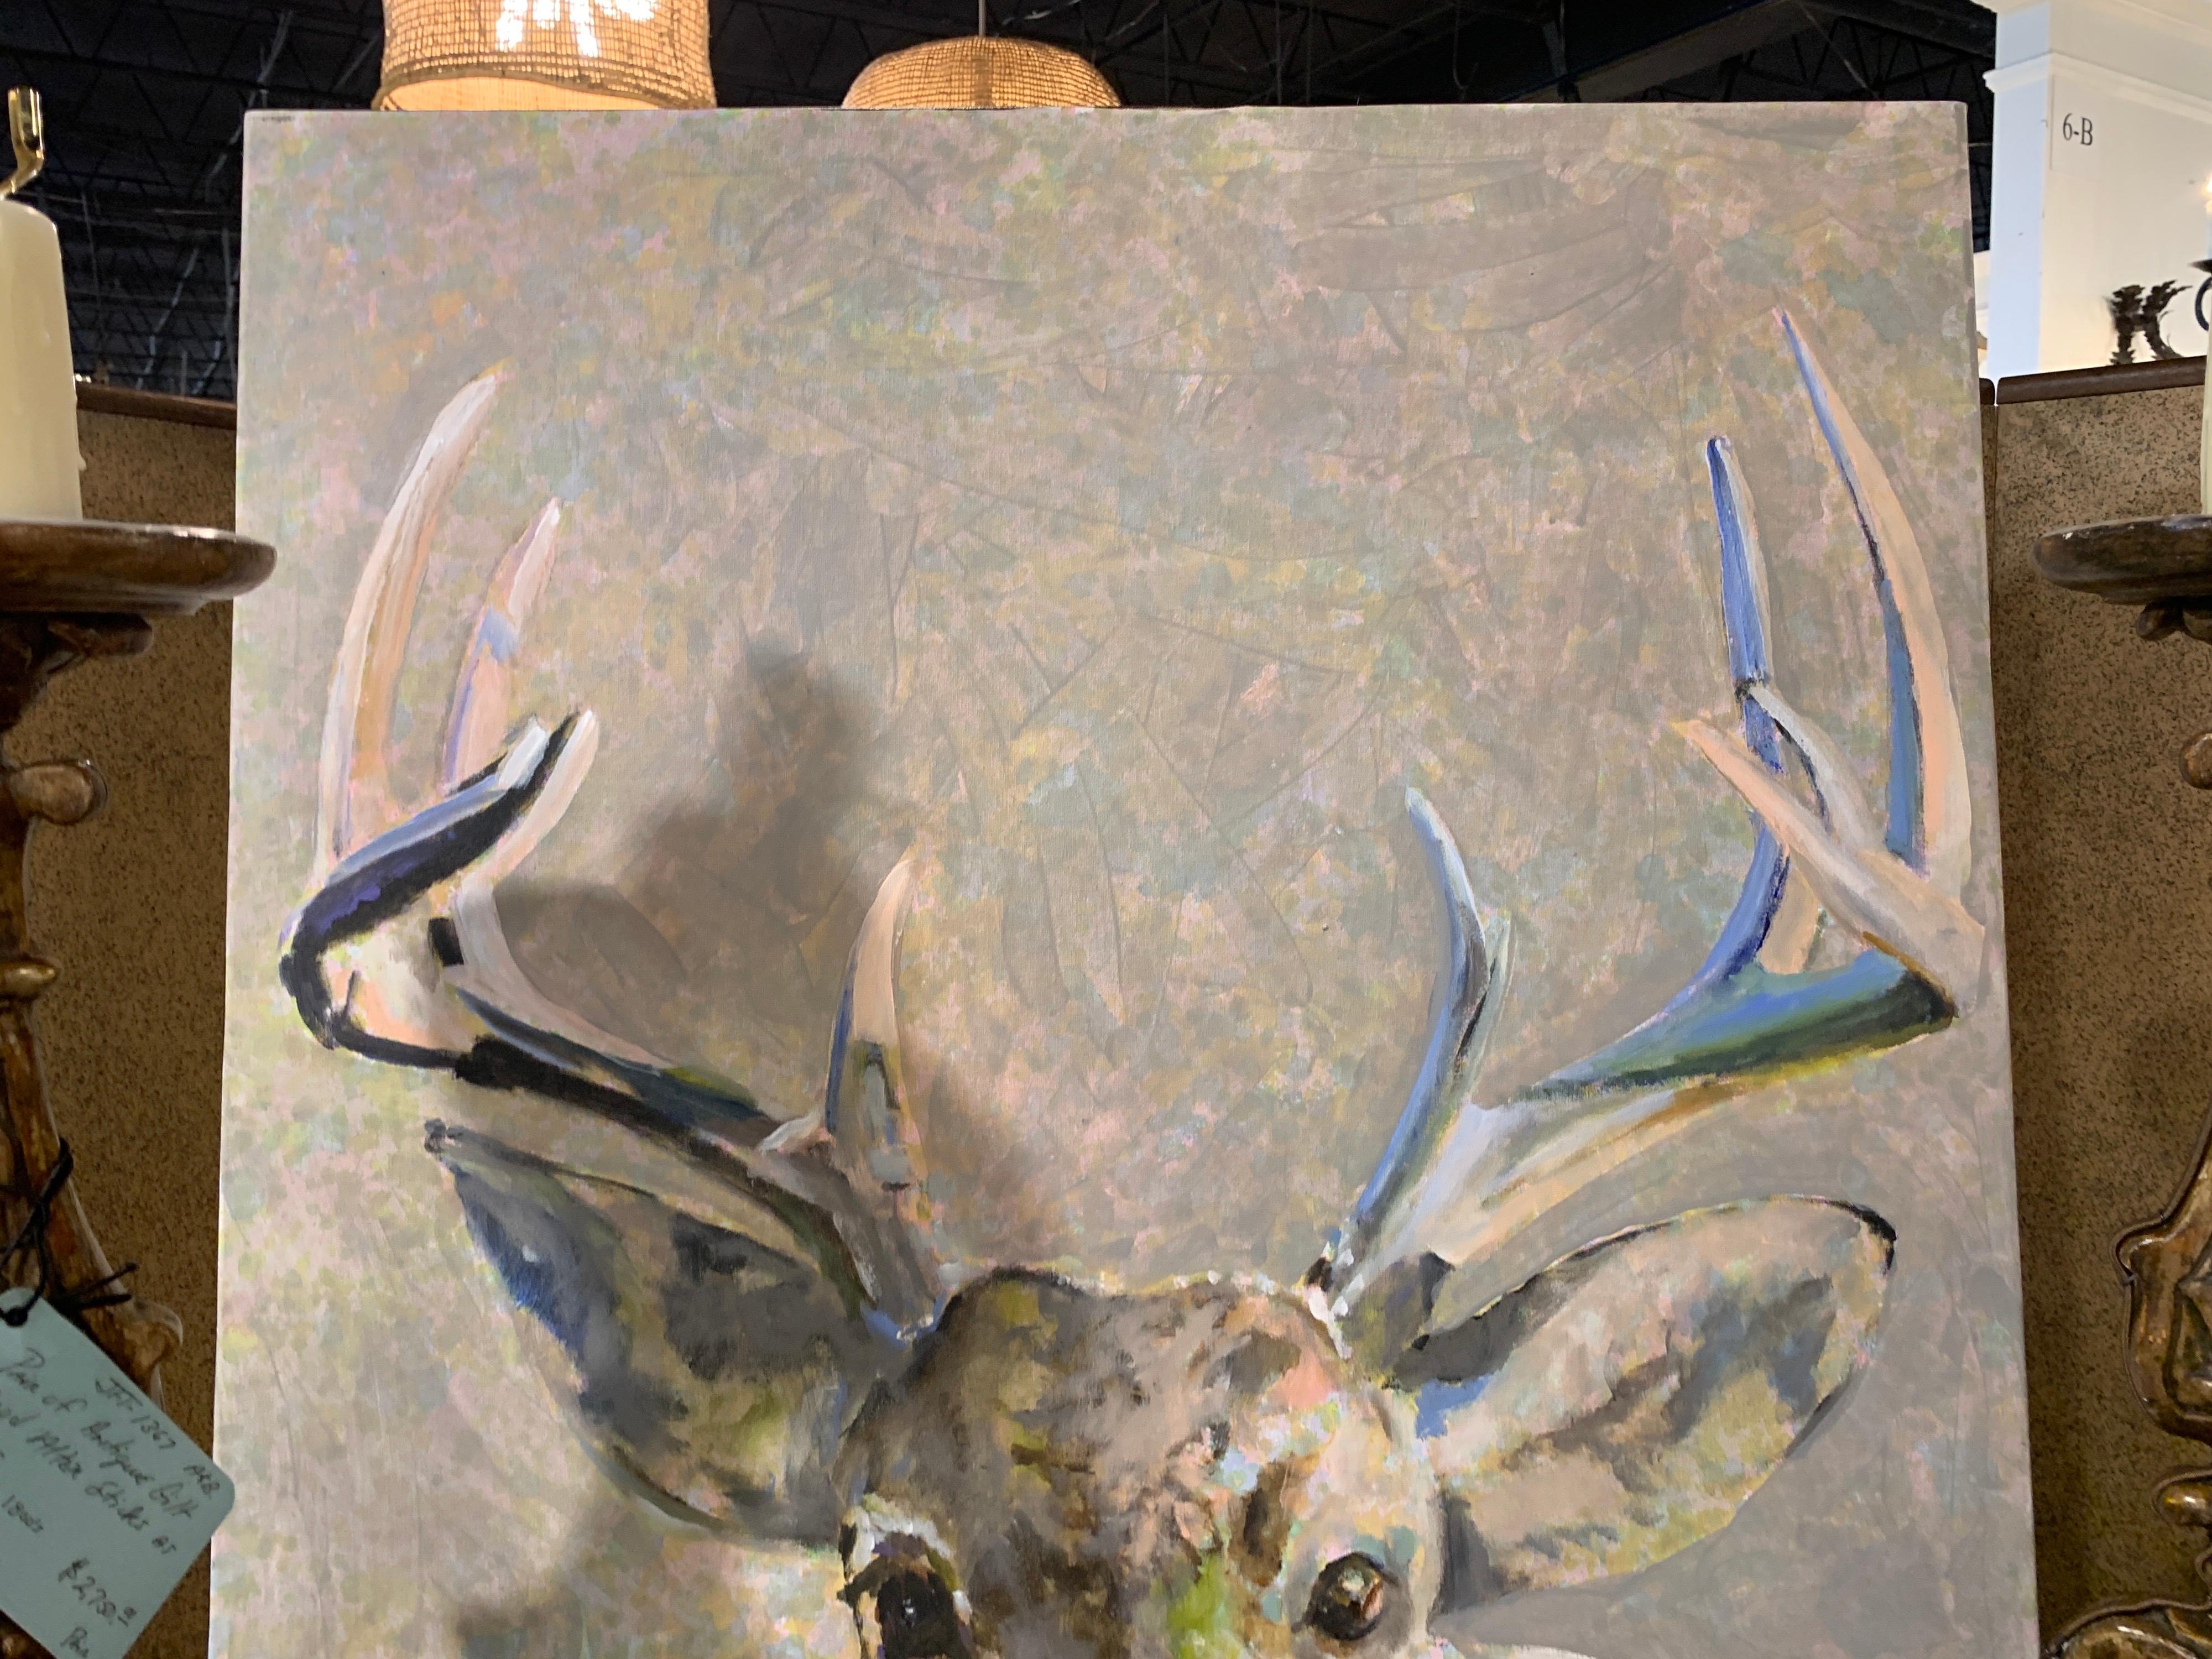 'As A Deer' is a large vertical mixed media on canvas deer painting created by American artist Carylon Killebrew in 2021. Featuring a palette made of gray, brown, black and a touch of blue tones, the painting centers our attention on a closeup of